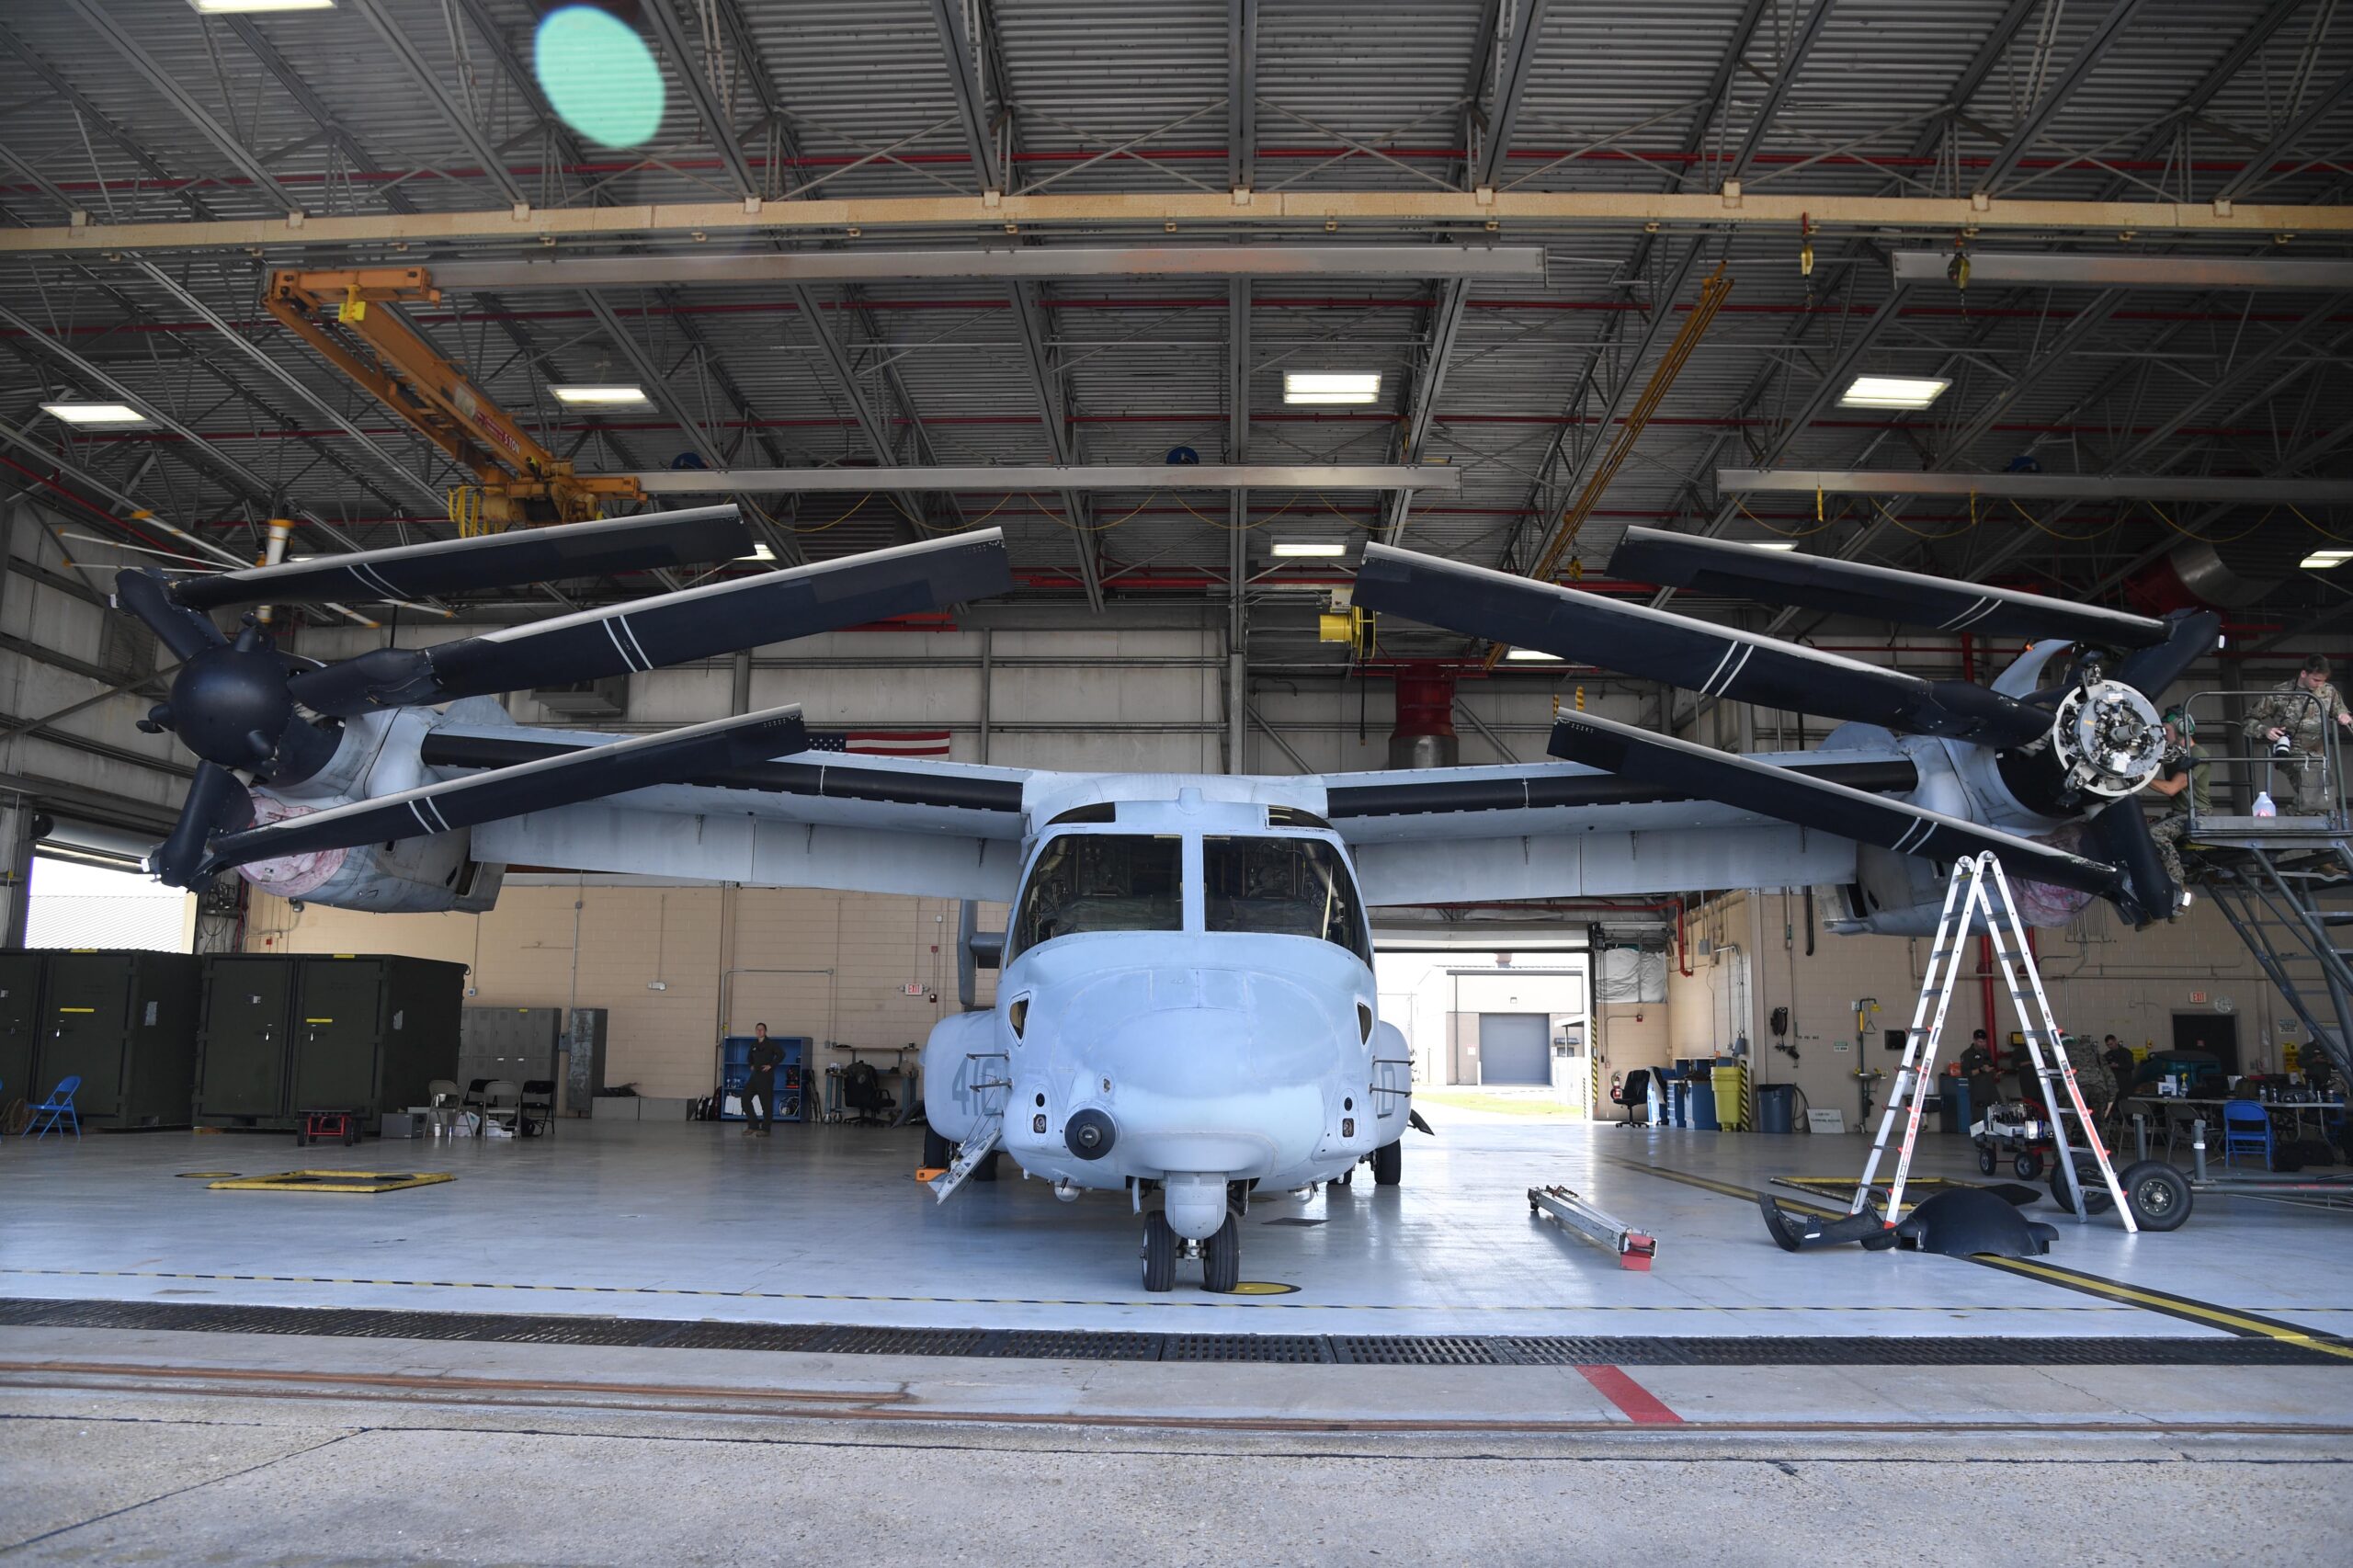 A MV-22B Osprey from Marine Medium Tiltrotor Squadron 774, Naval Air Station Norfolk, Virginia, receives routine maintenance inside a hangar at Keesler Air Force Base, Mississippi, October 2020. <em>U.S. Air Force photo by Kemberly Groue</em>